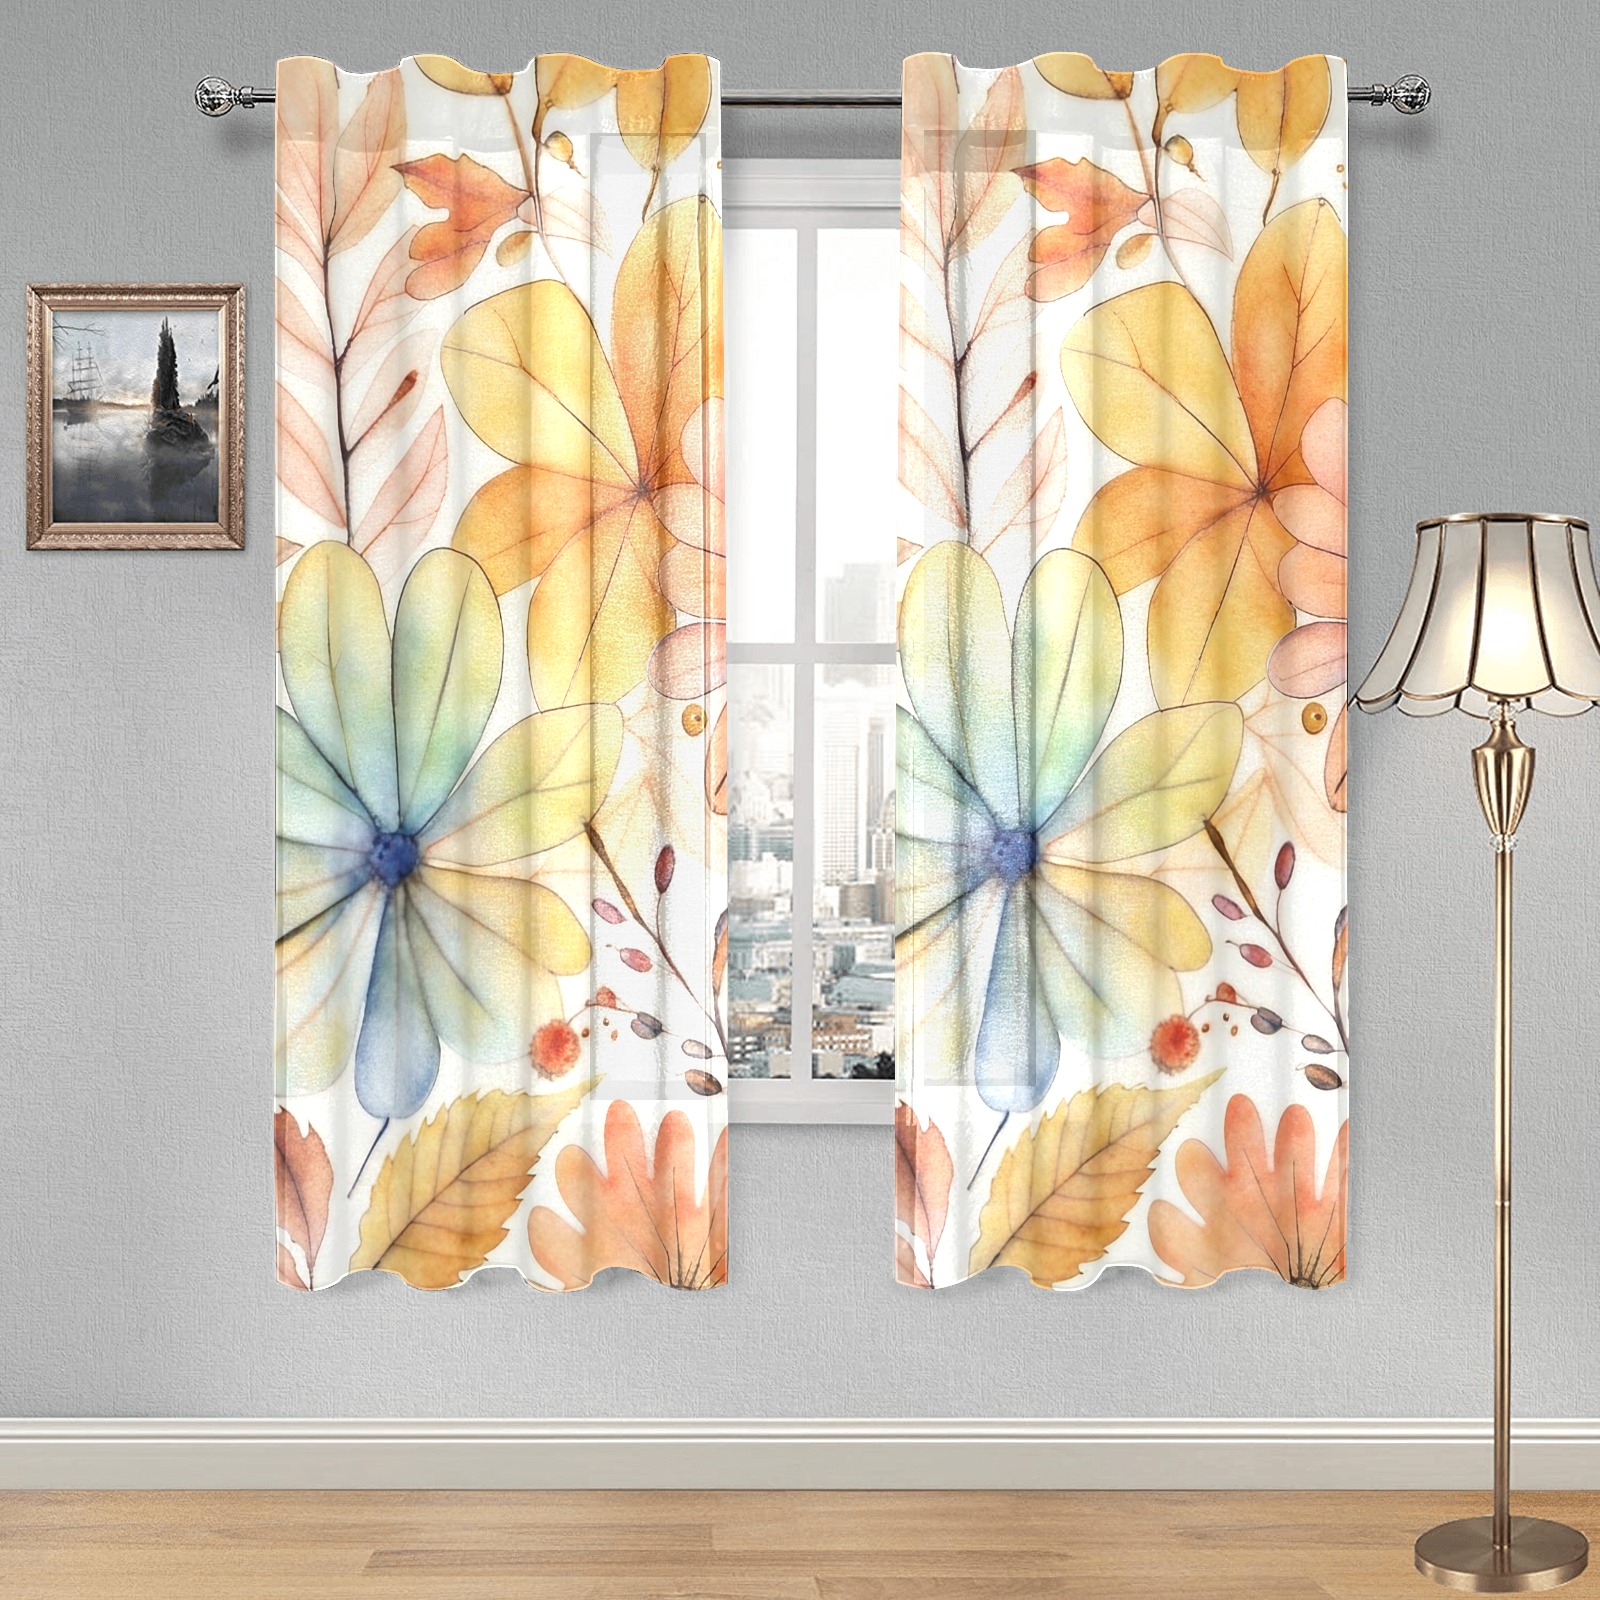 Watercolor Floral 2 Gauze Curtain 28"x63" (Two-Piece)